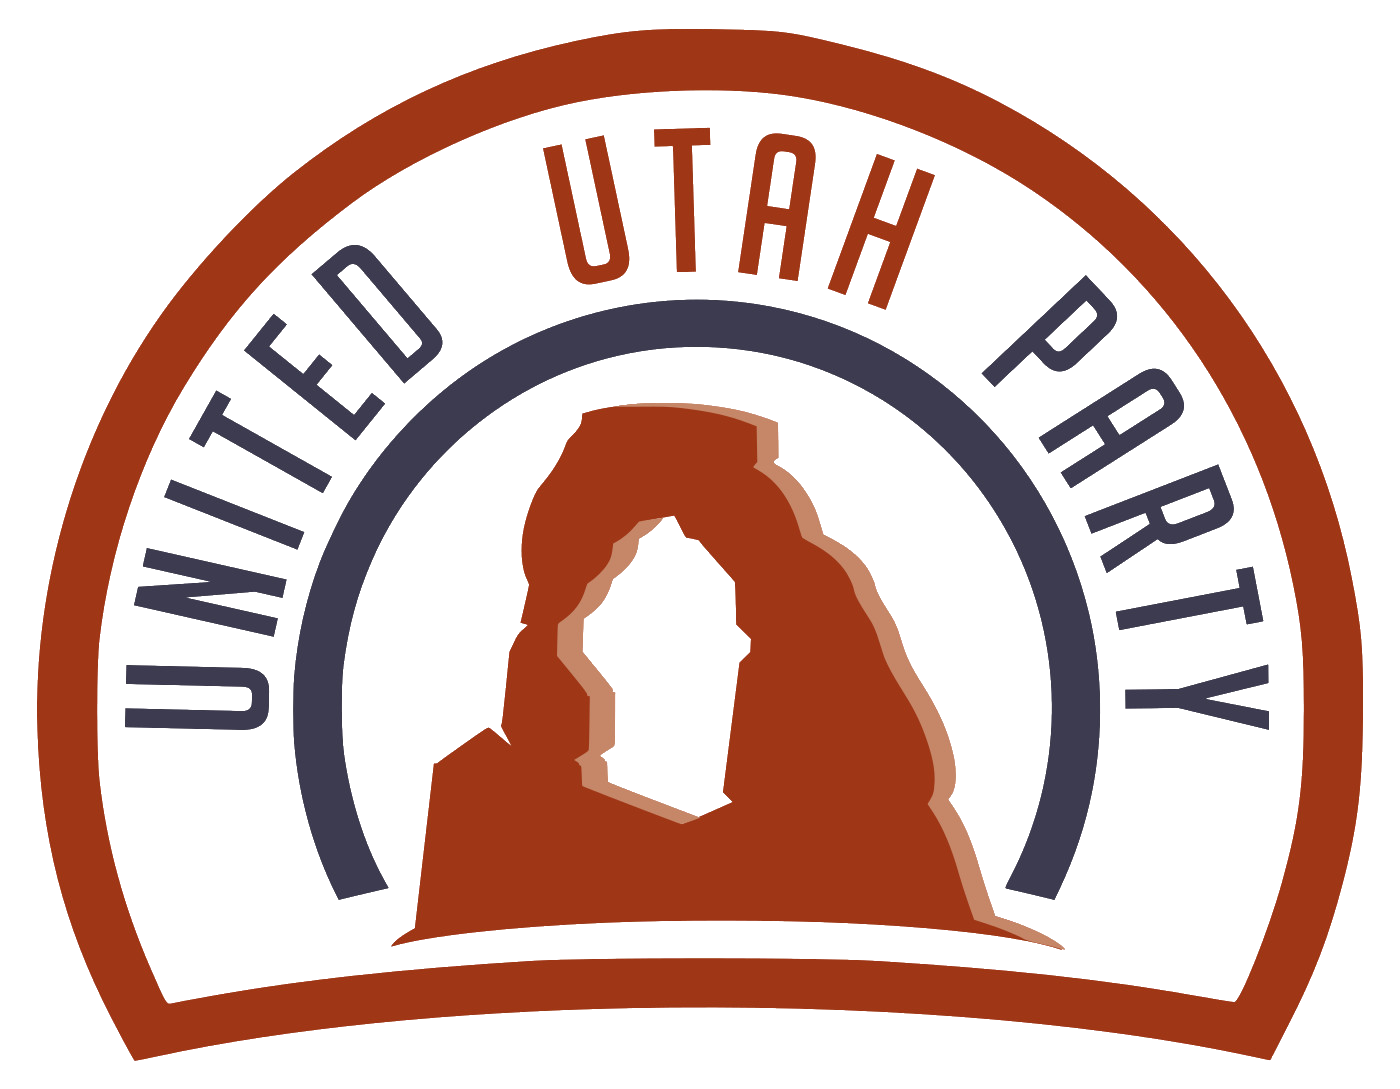 United Utah Party Candidate